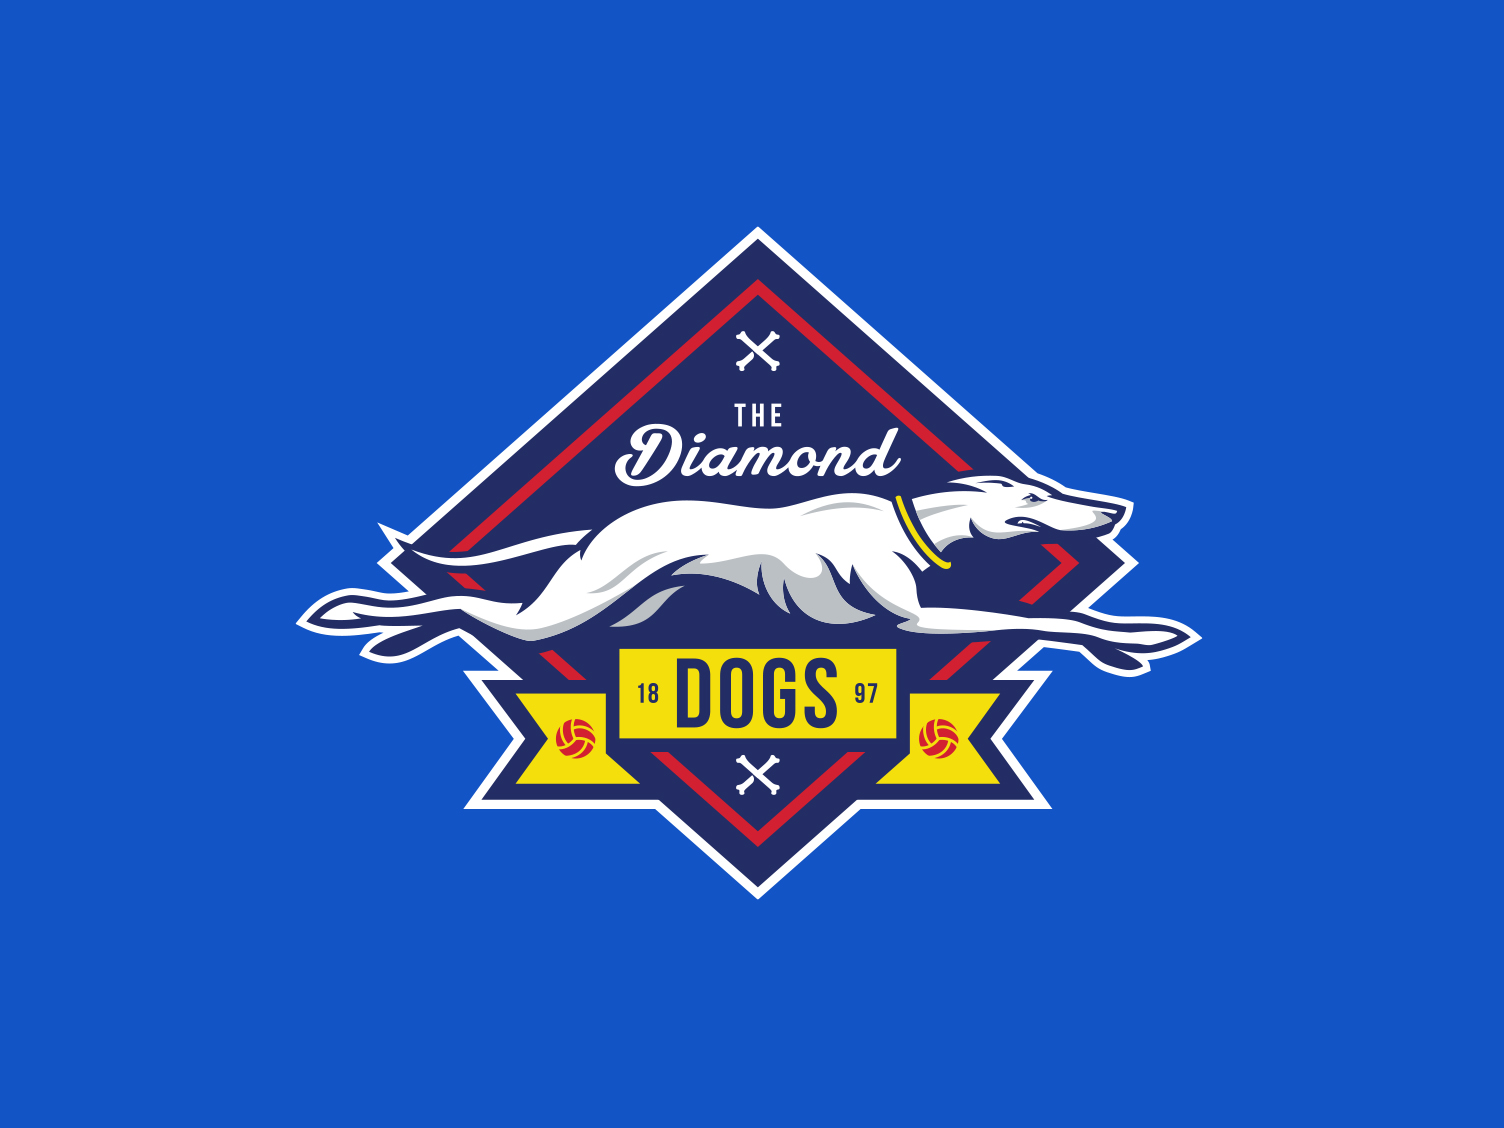 The Diamond Dogs by Michael Irwin on Dribbble